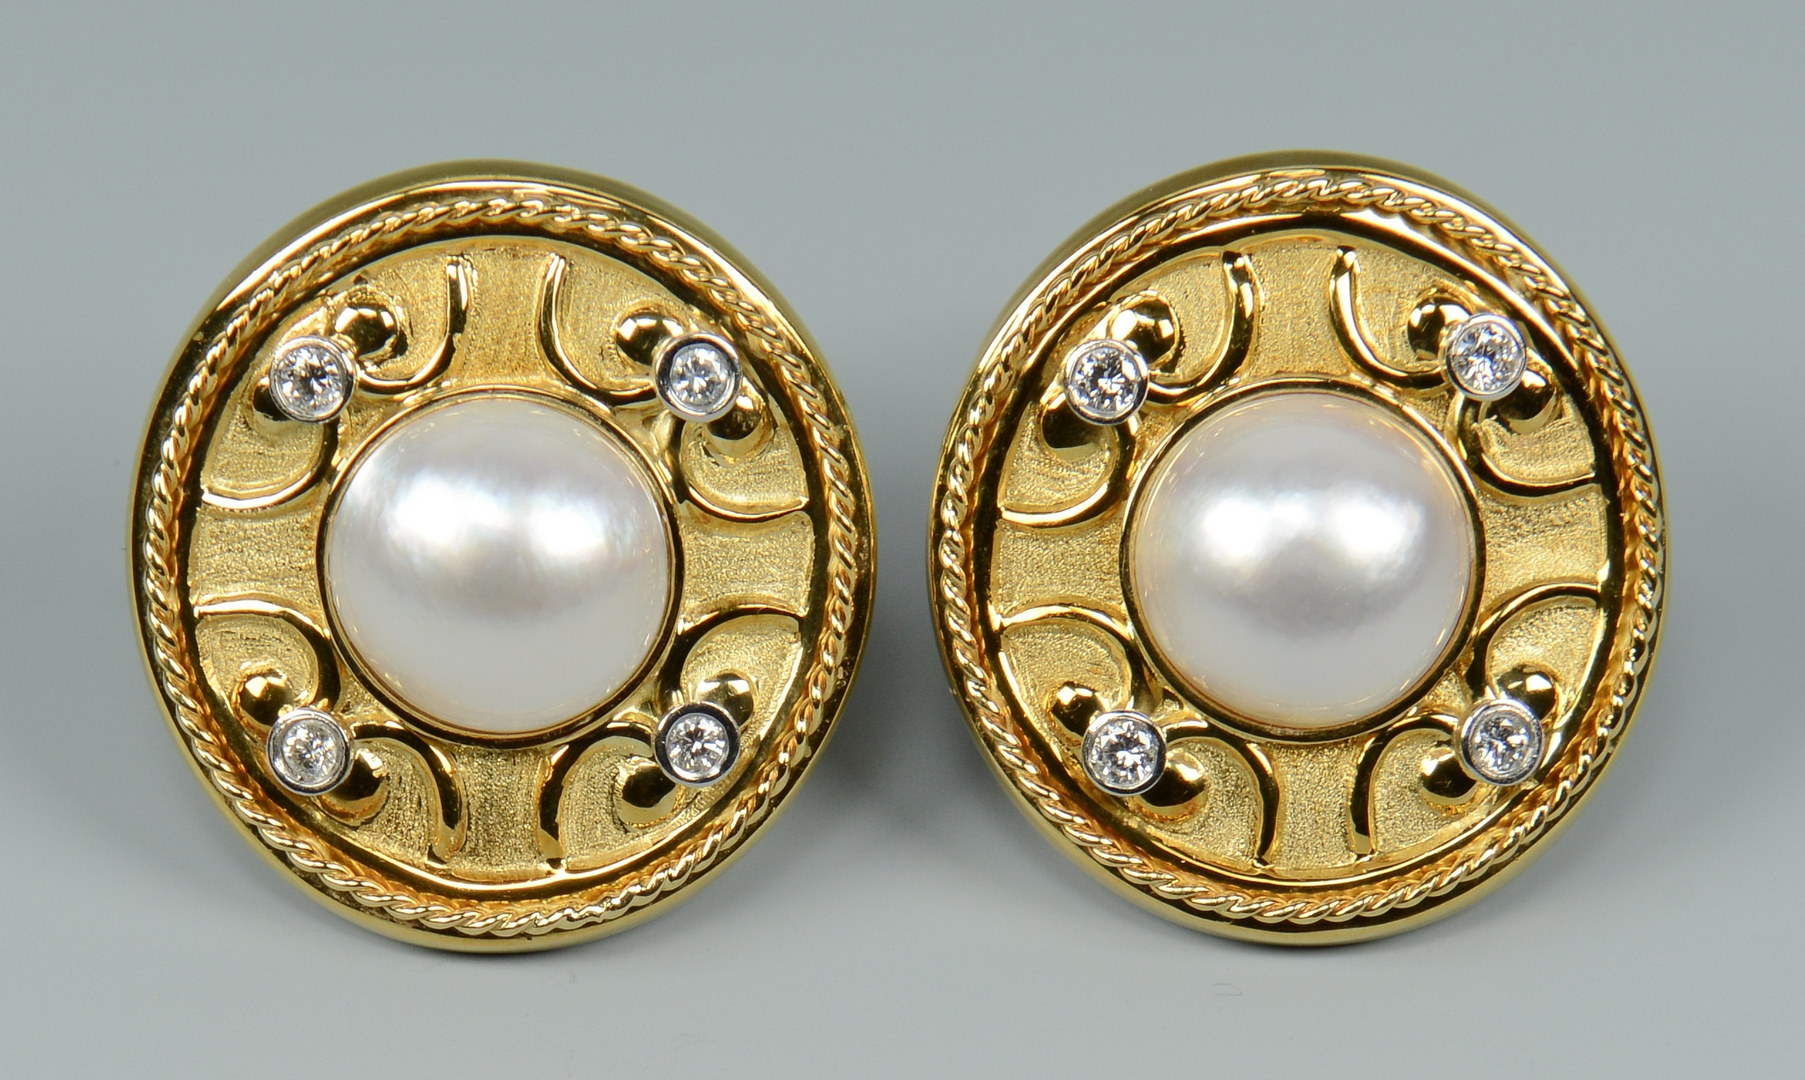 Lot 3088225: Pair Etruscan style 18k Mabe Pearl Dia Earrings